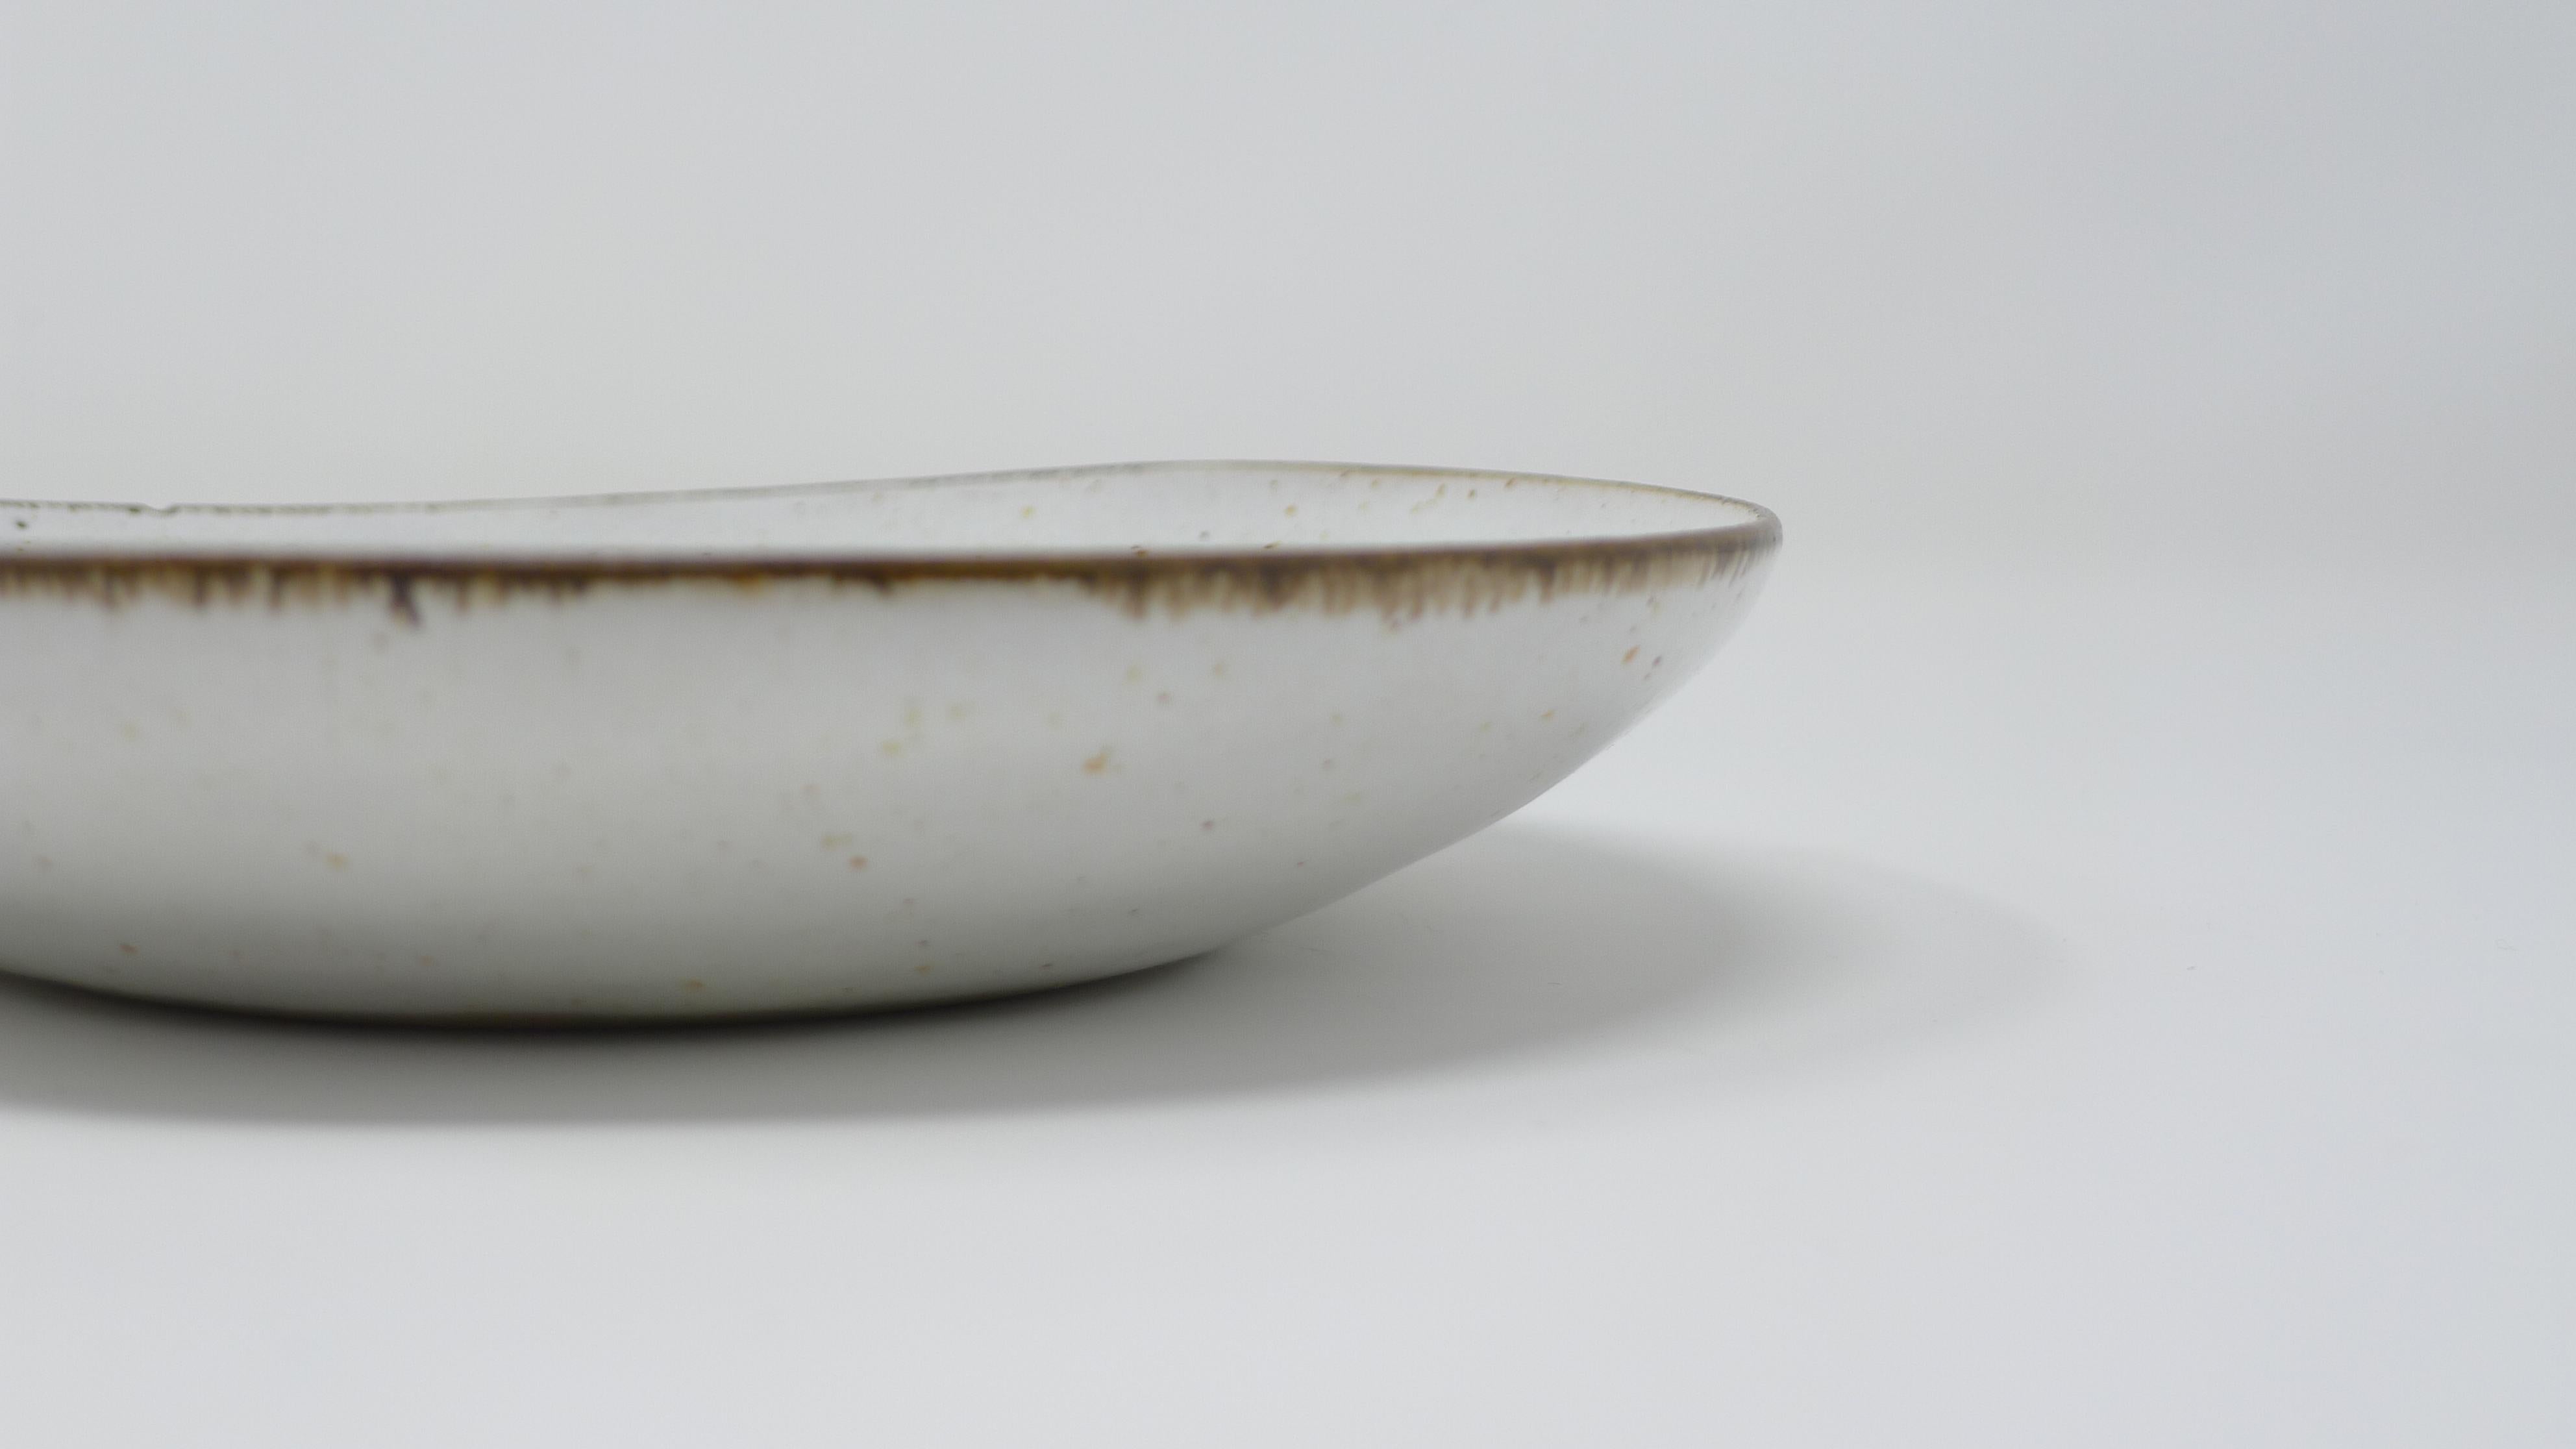 Mid-20th Century Lucie Rie; Handled Dish in Cream, Signed to Underside, 1950s